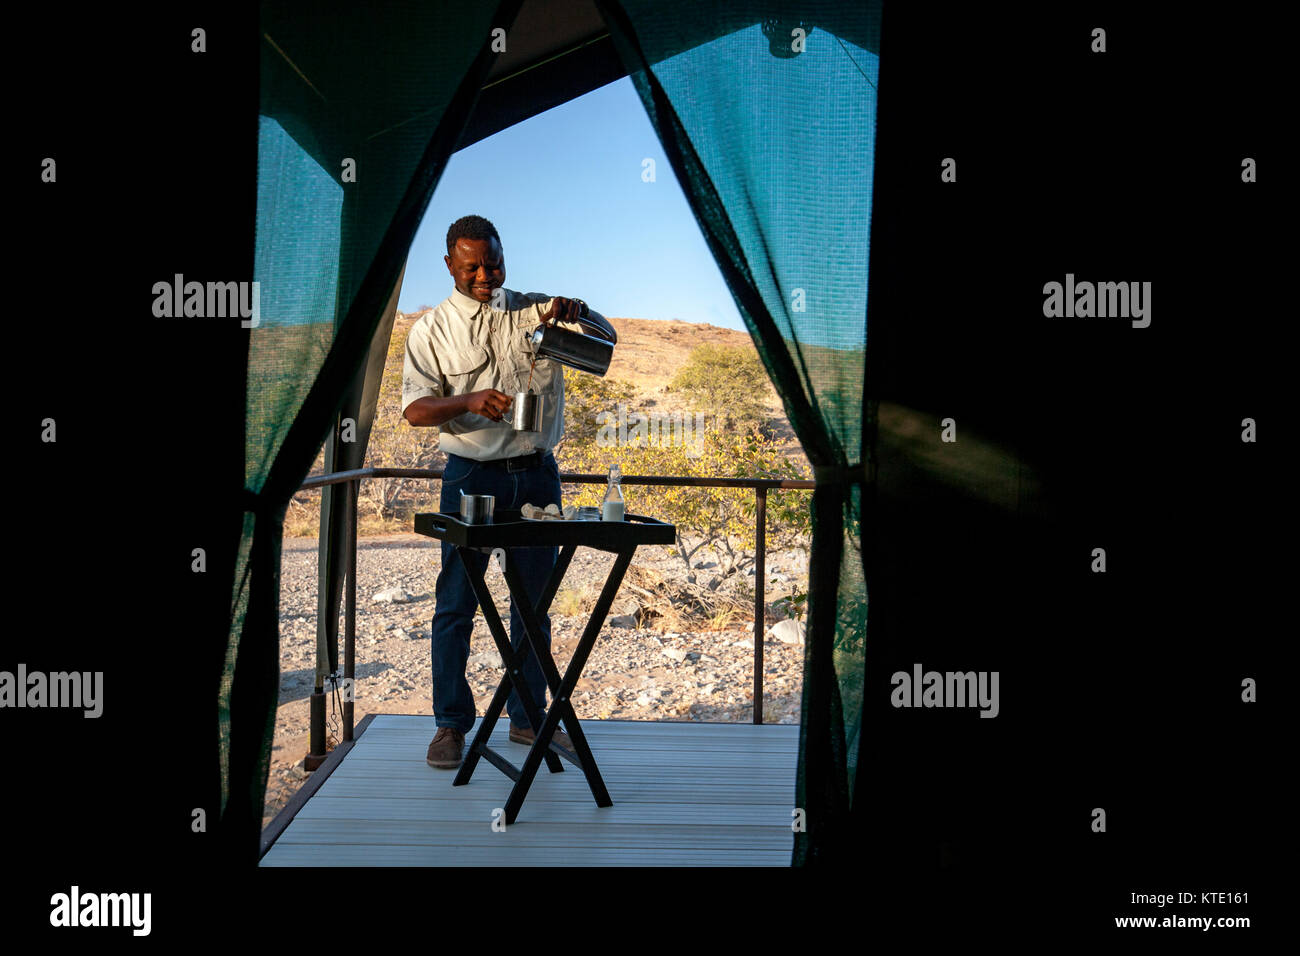 Staff person serving coffee at Huab Under Canvas, Damaraland, Namibia, Africa Stock Photo